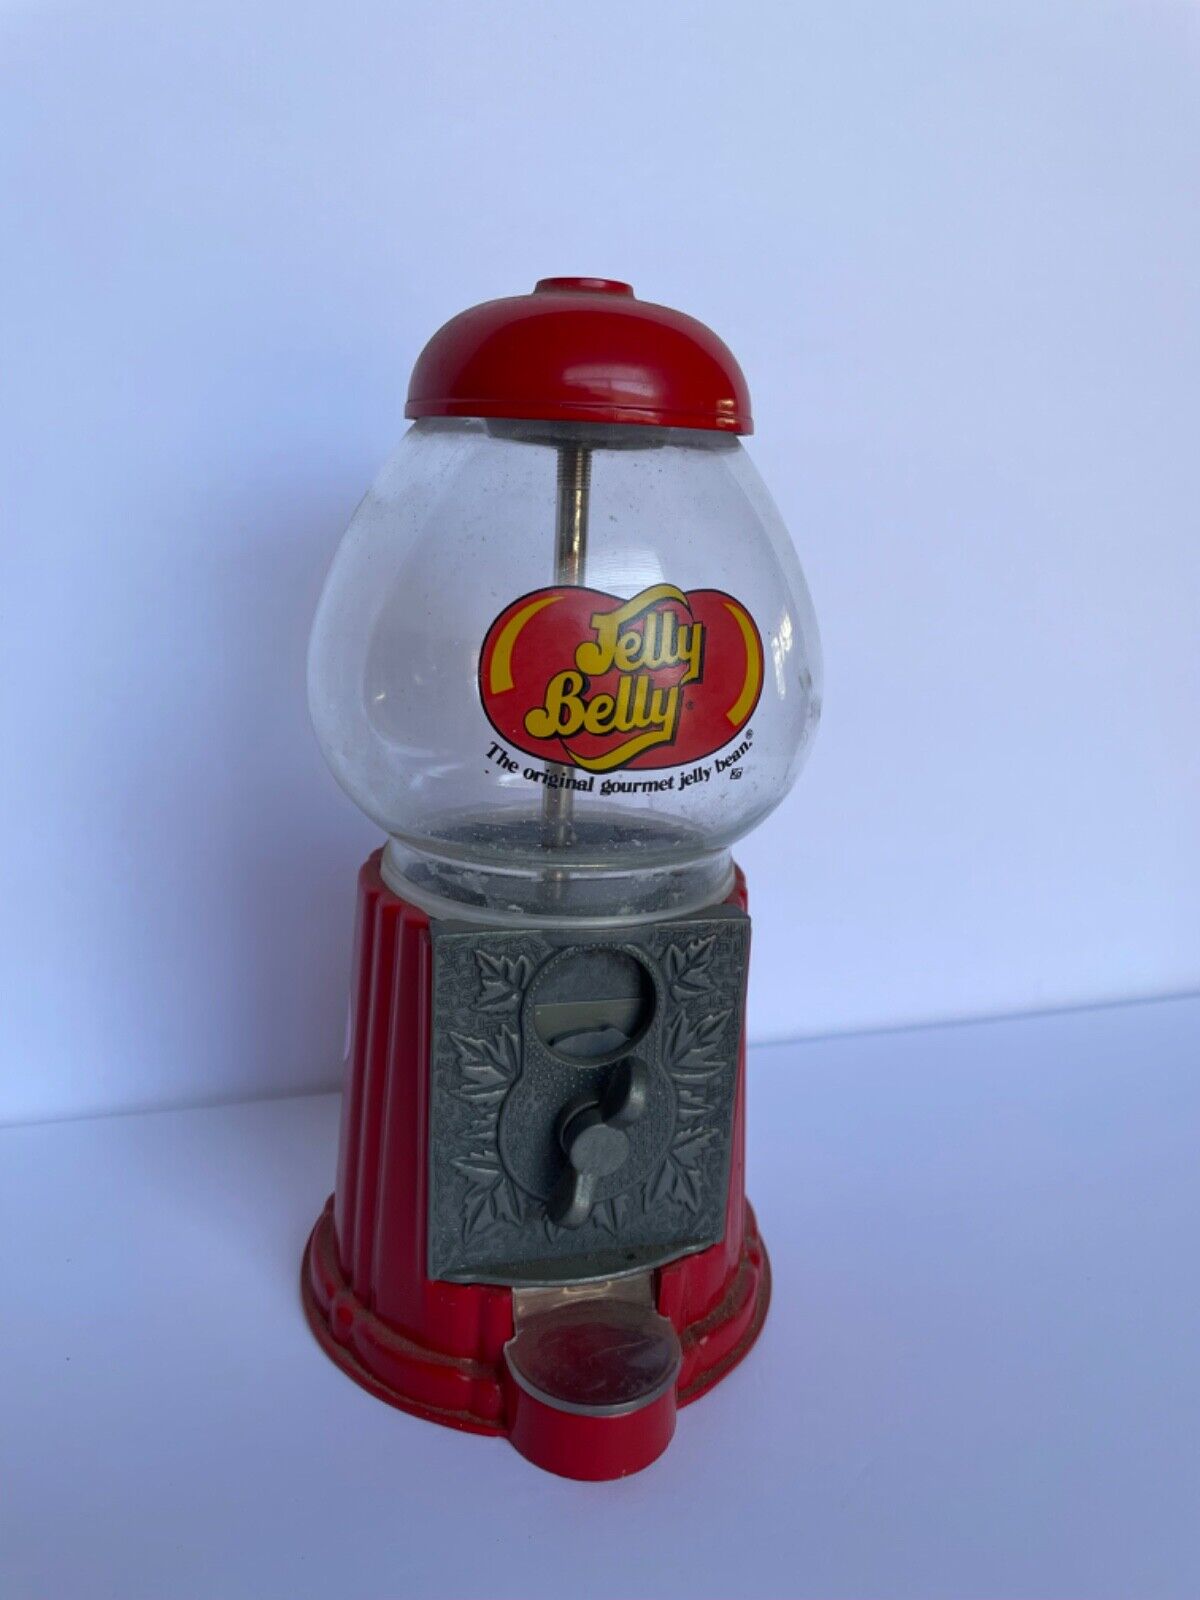 JELLY BELLY MINI BEAN MACHINE CANDY DISPENSER BANK DIE CAST METAL GUMBALL GLASS